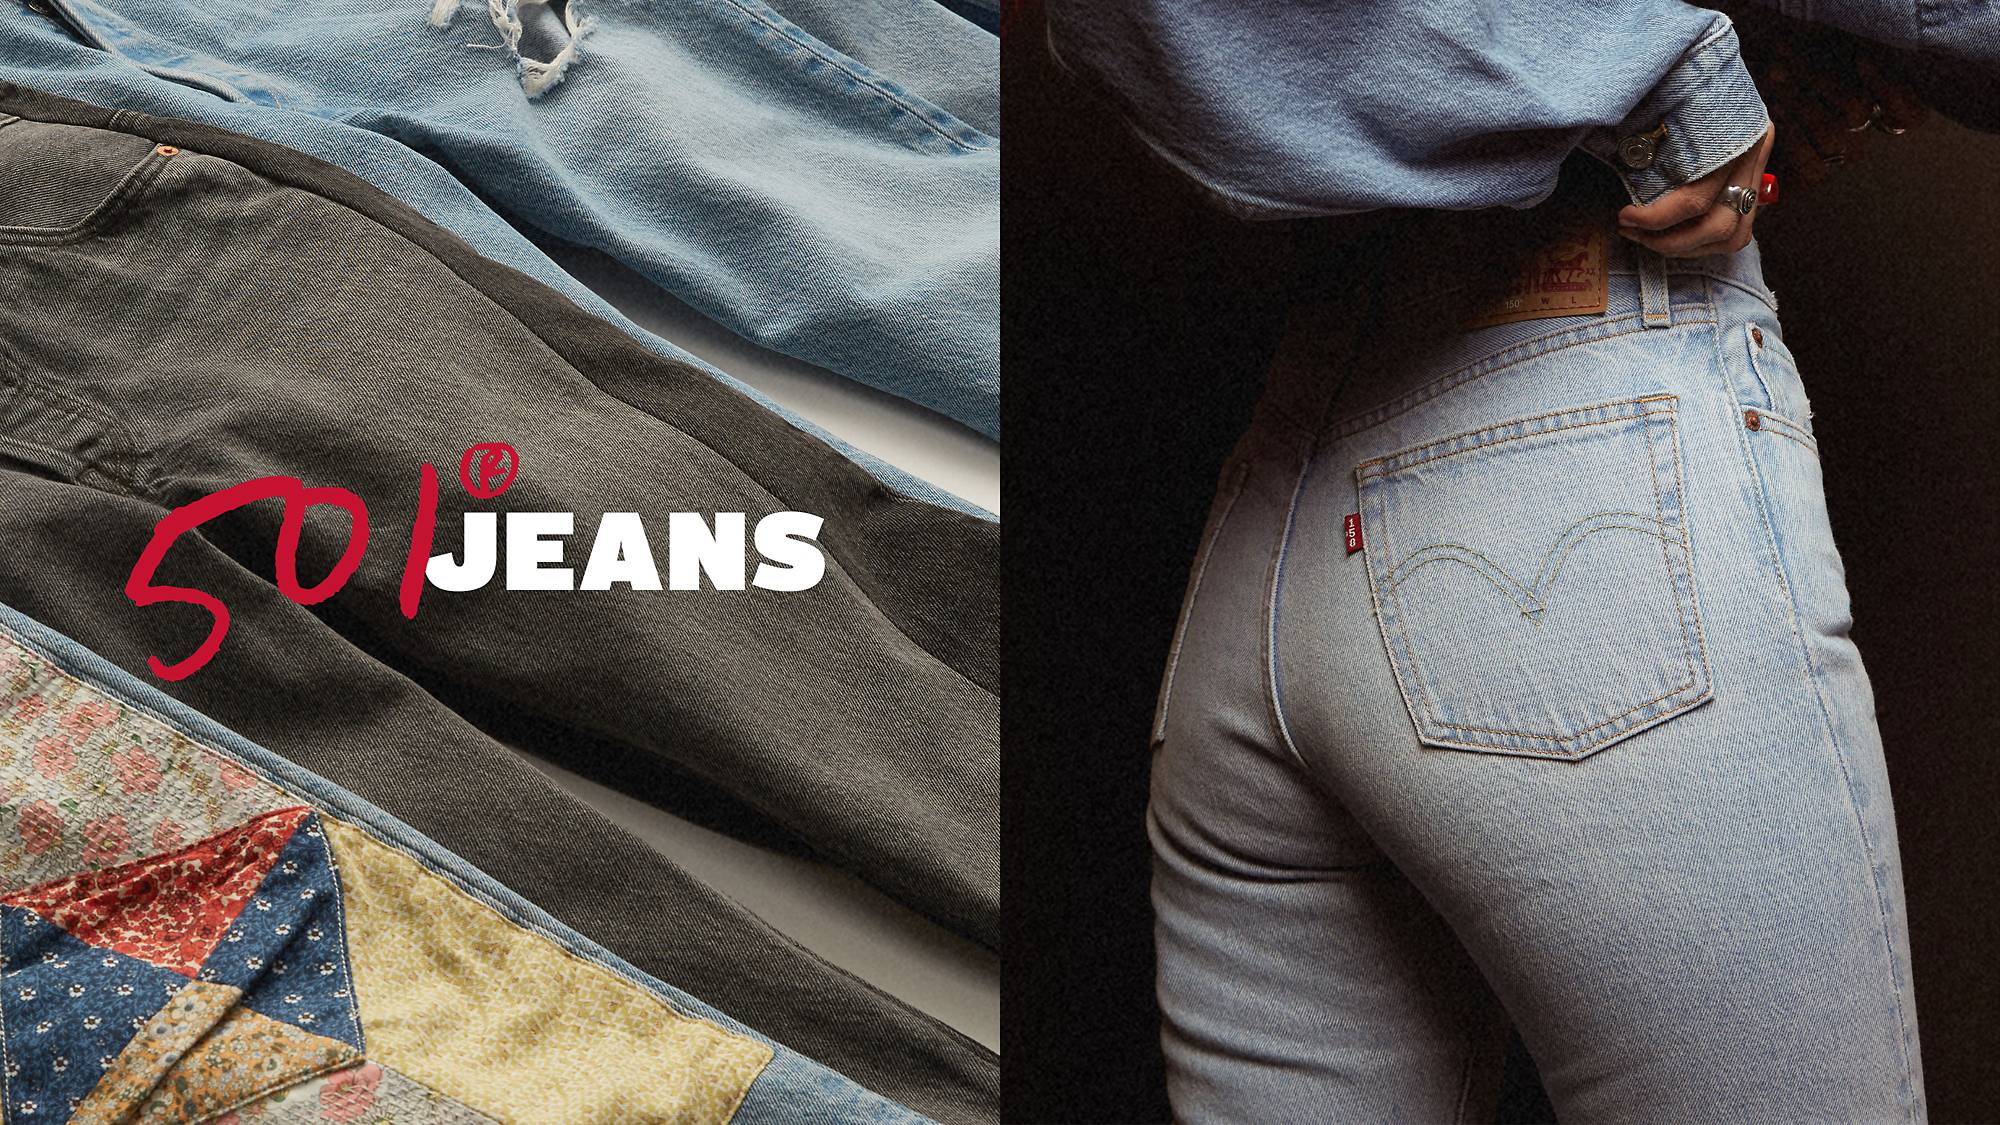 Split screen of women's 501® buttshot and multi jean flat lay with overlaid "501® Jeans" graphic lockup